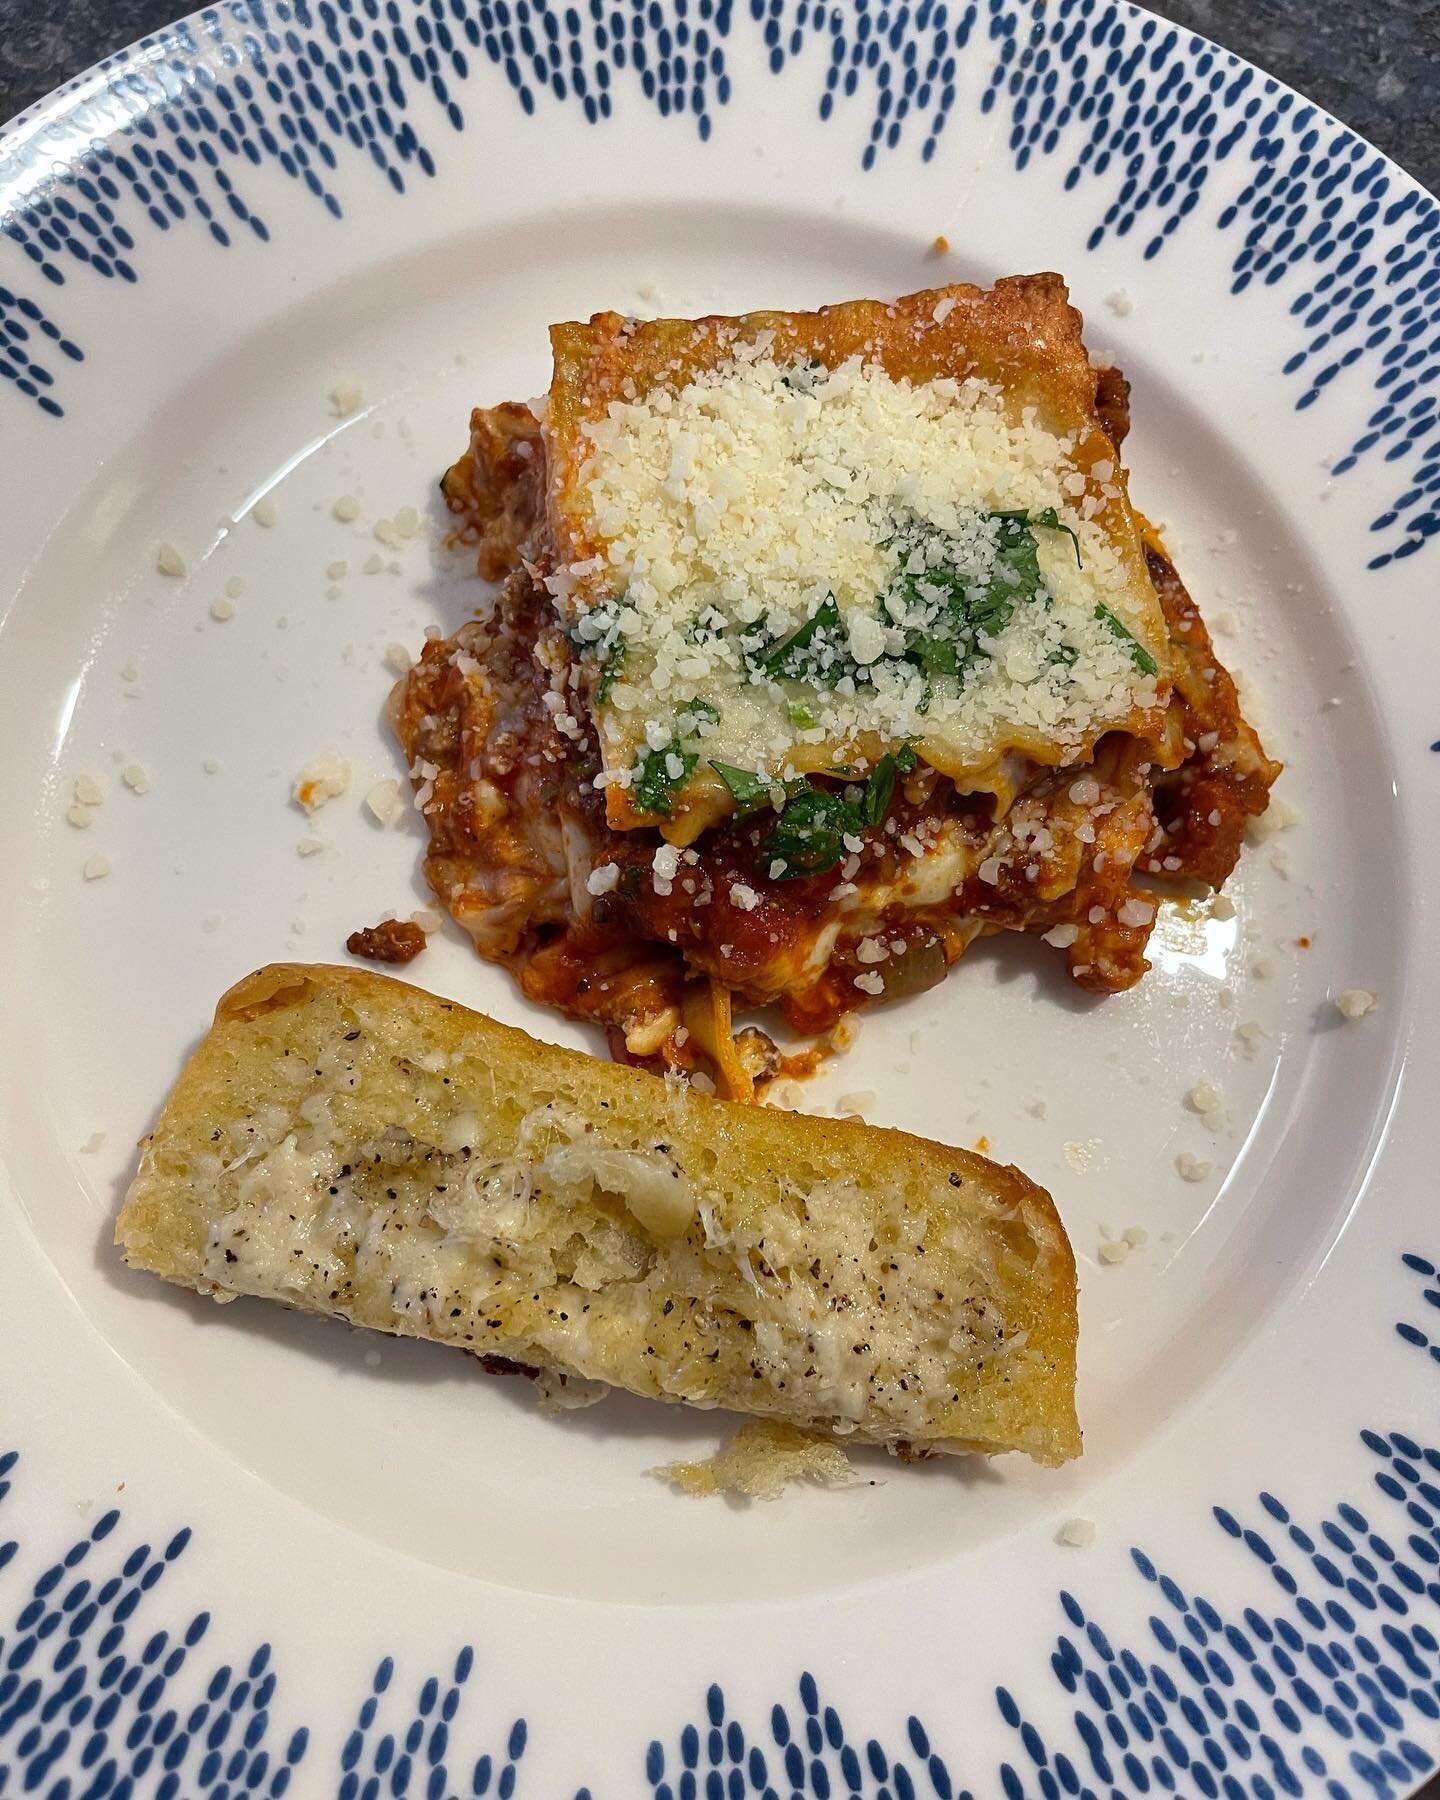 The Seriously Delicious Lasagna recipe is live! Click the link in my bio to get it today and add a some cheesy meaty goodness into your lives. 🤤 #italianfood #italianrecipes #dinnerideas #dinnerrecipes #lasagna #lasagnalover #cheesepull